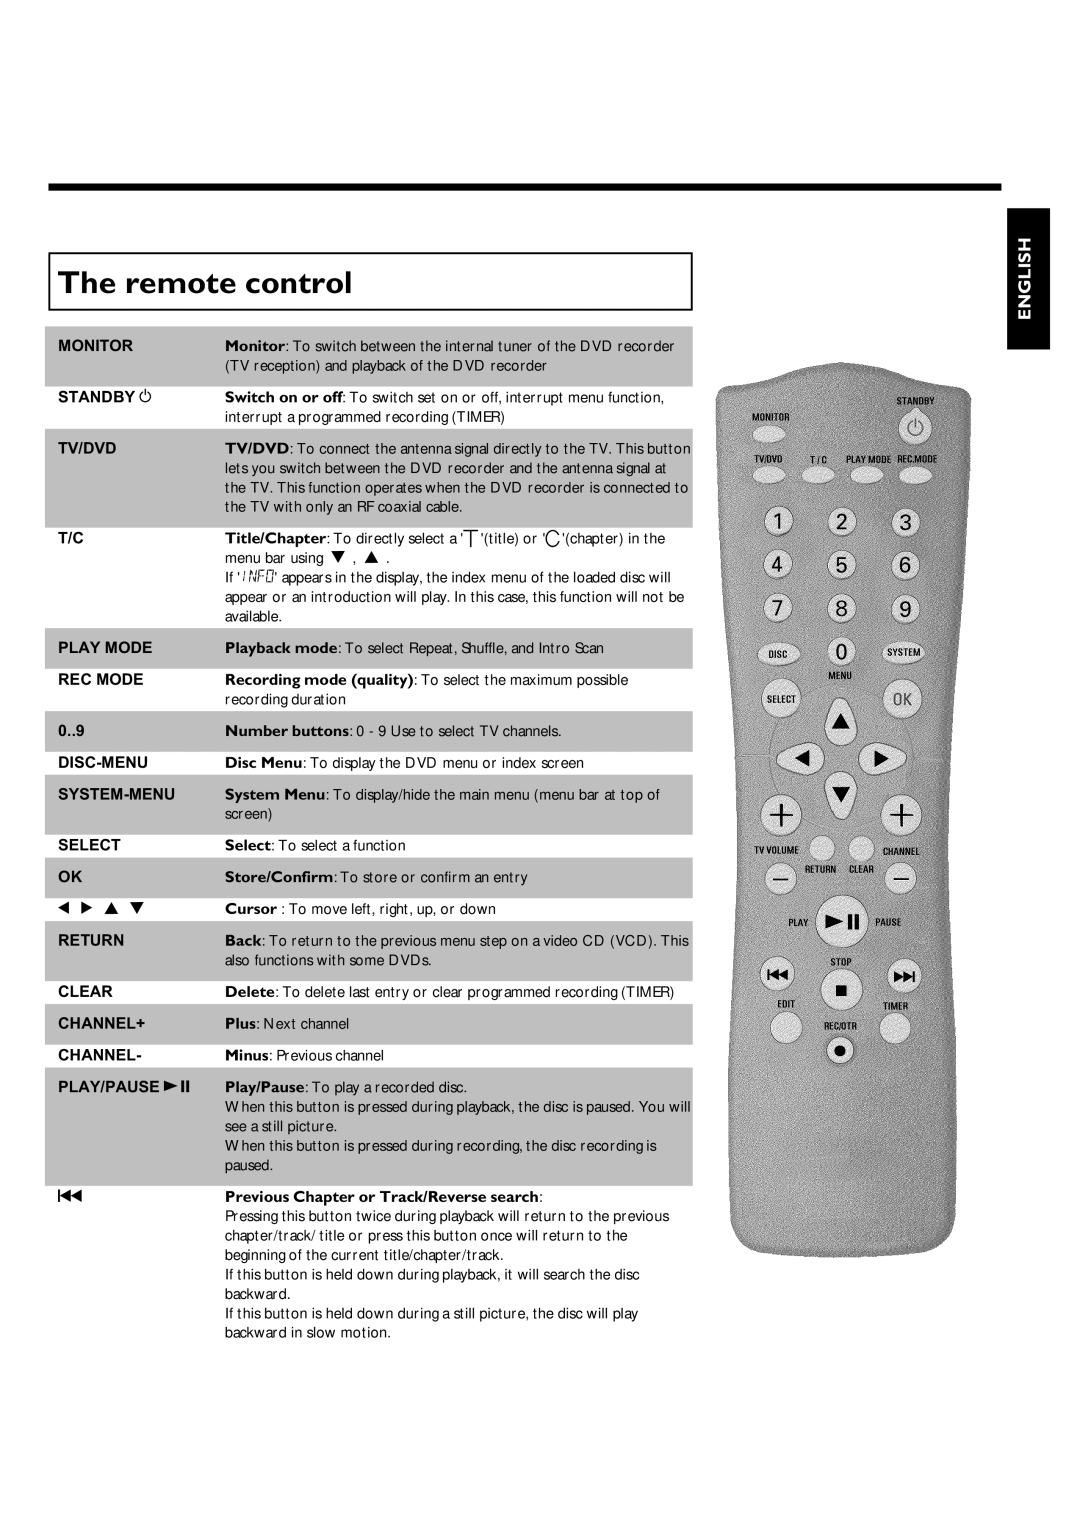 Magnavox MRV640 manual Remote control, Standby m, Previous Chapter or Track/Reverse search 